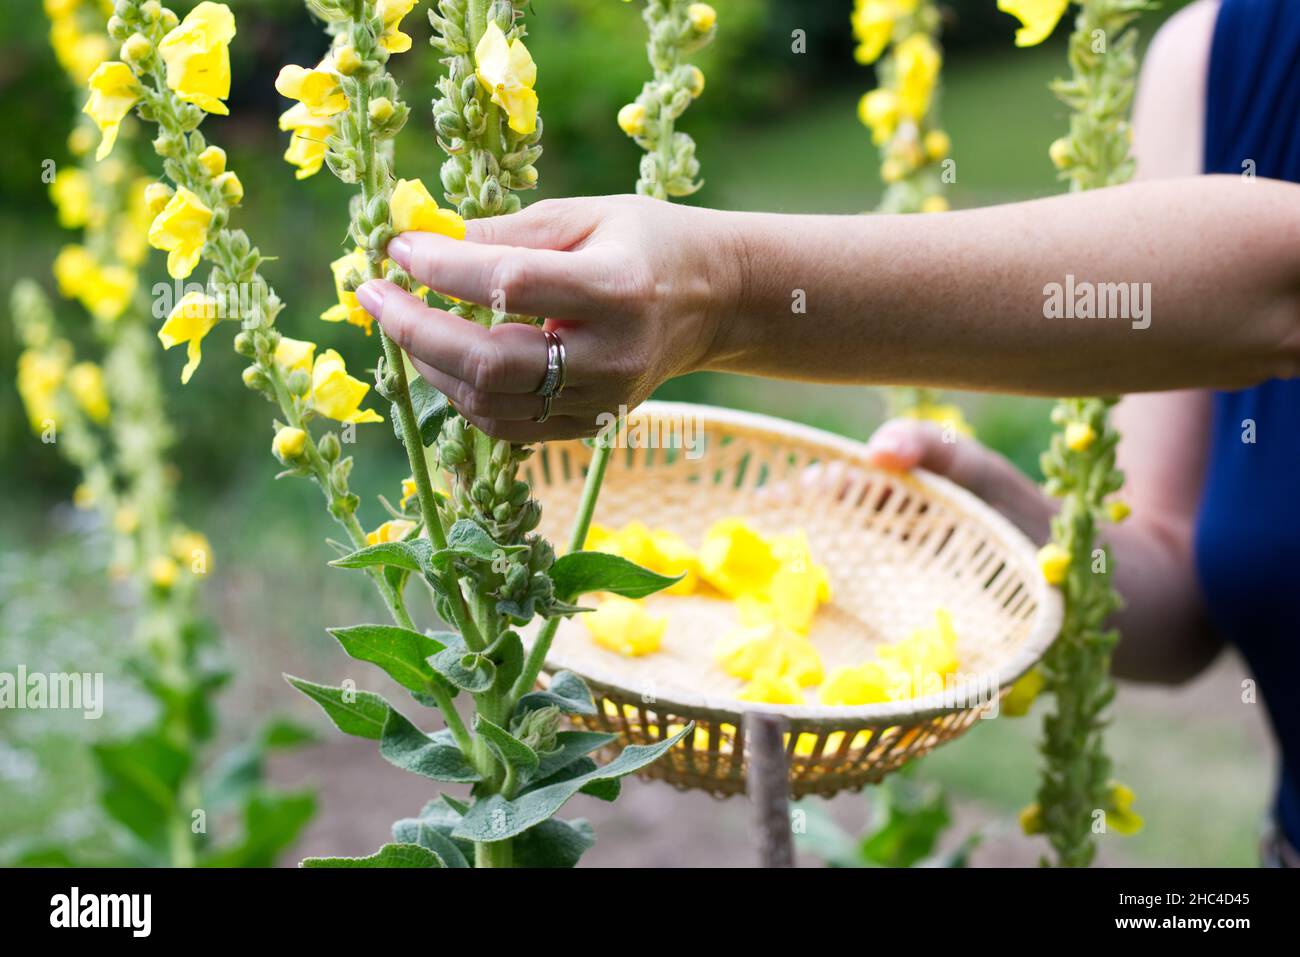 Woman collect mullein flowers to a wicker basket. Yellow verbascum in the garden. Stock Photo